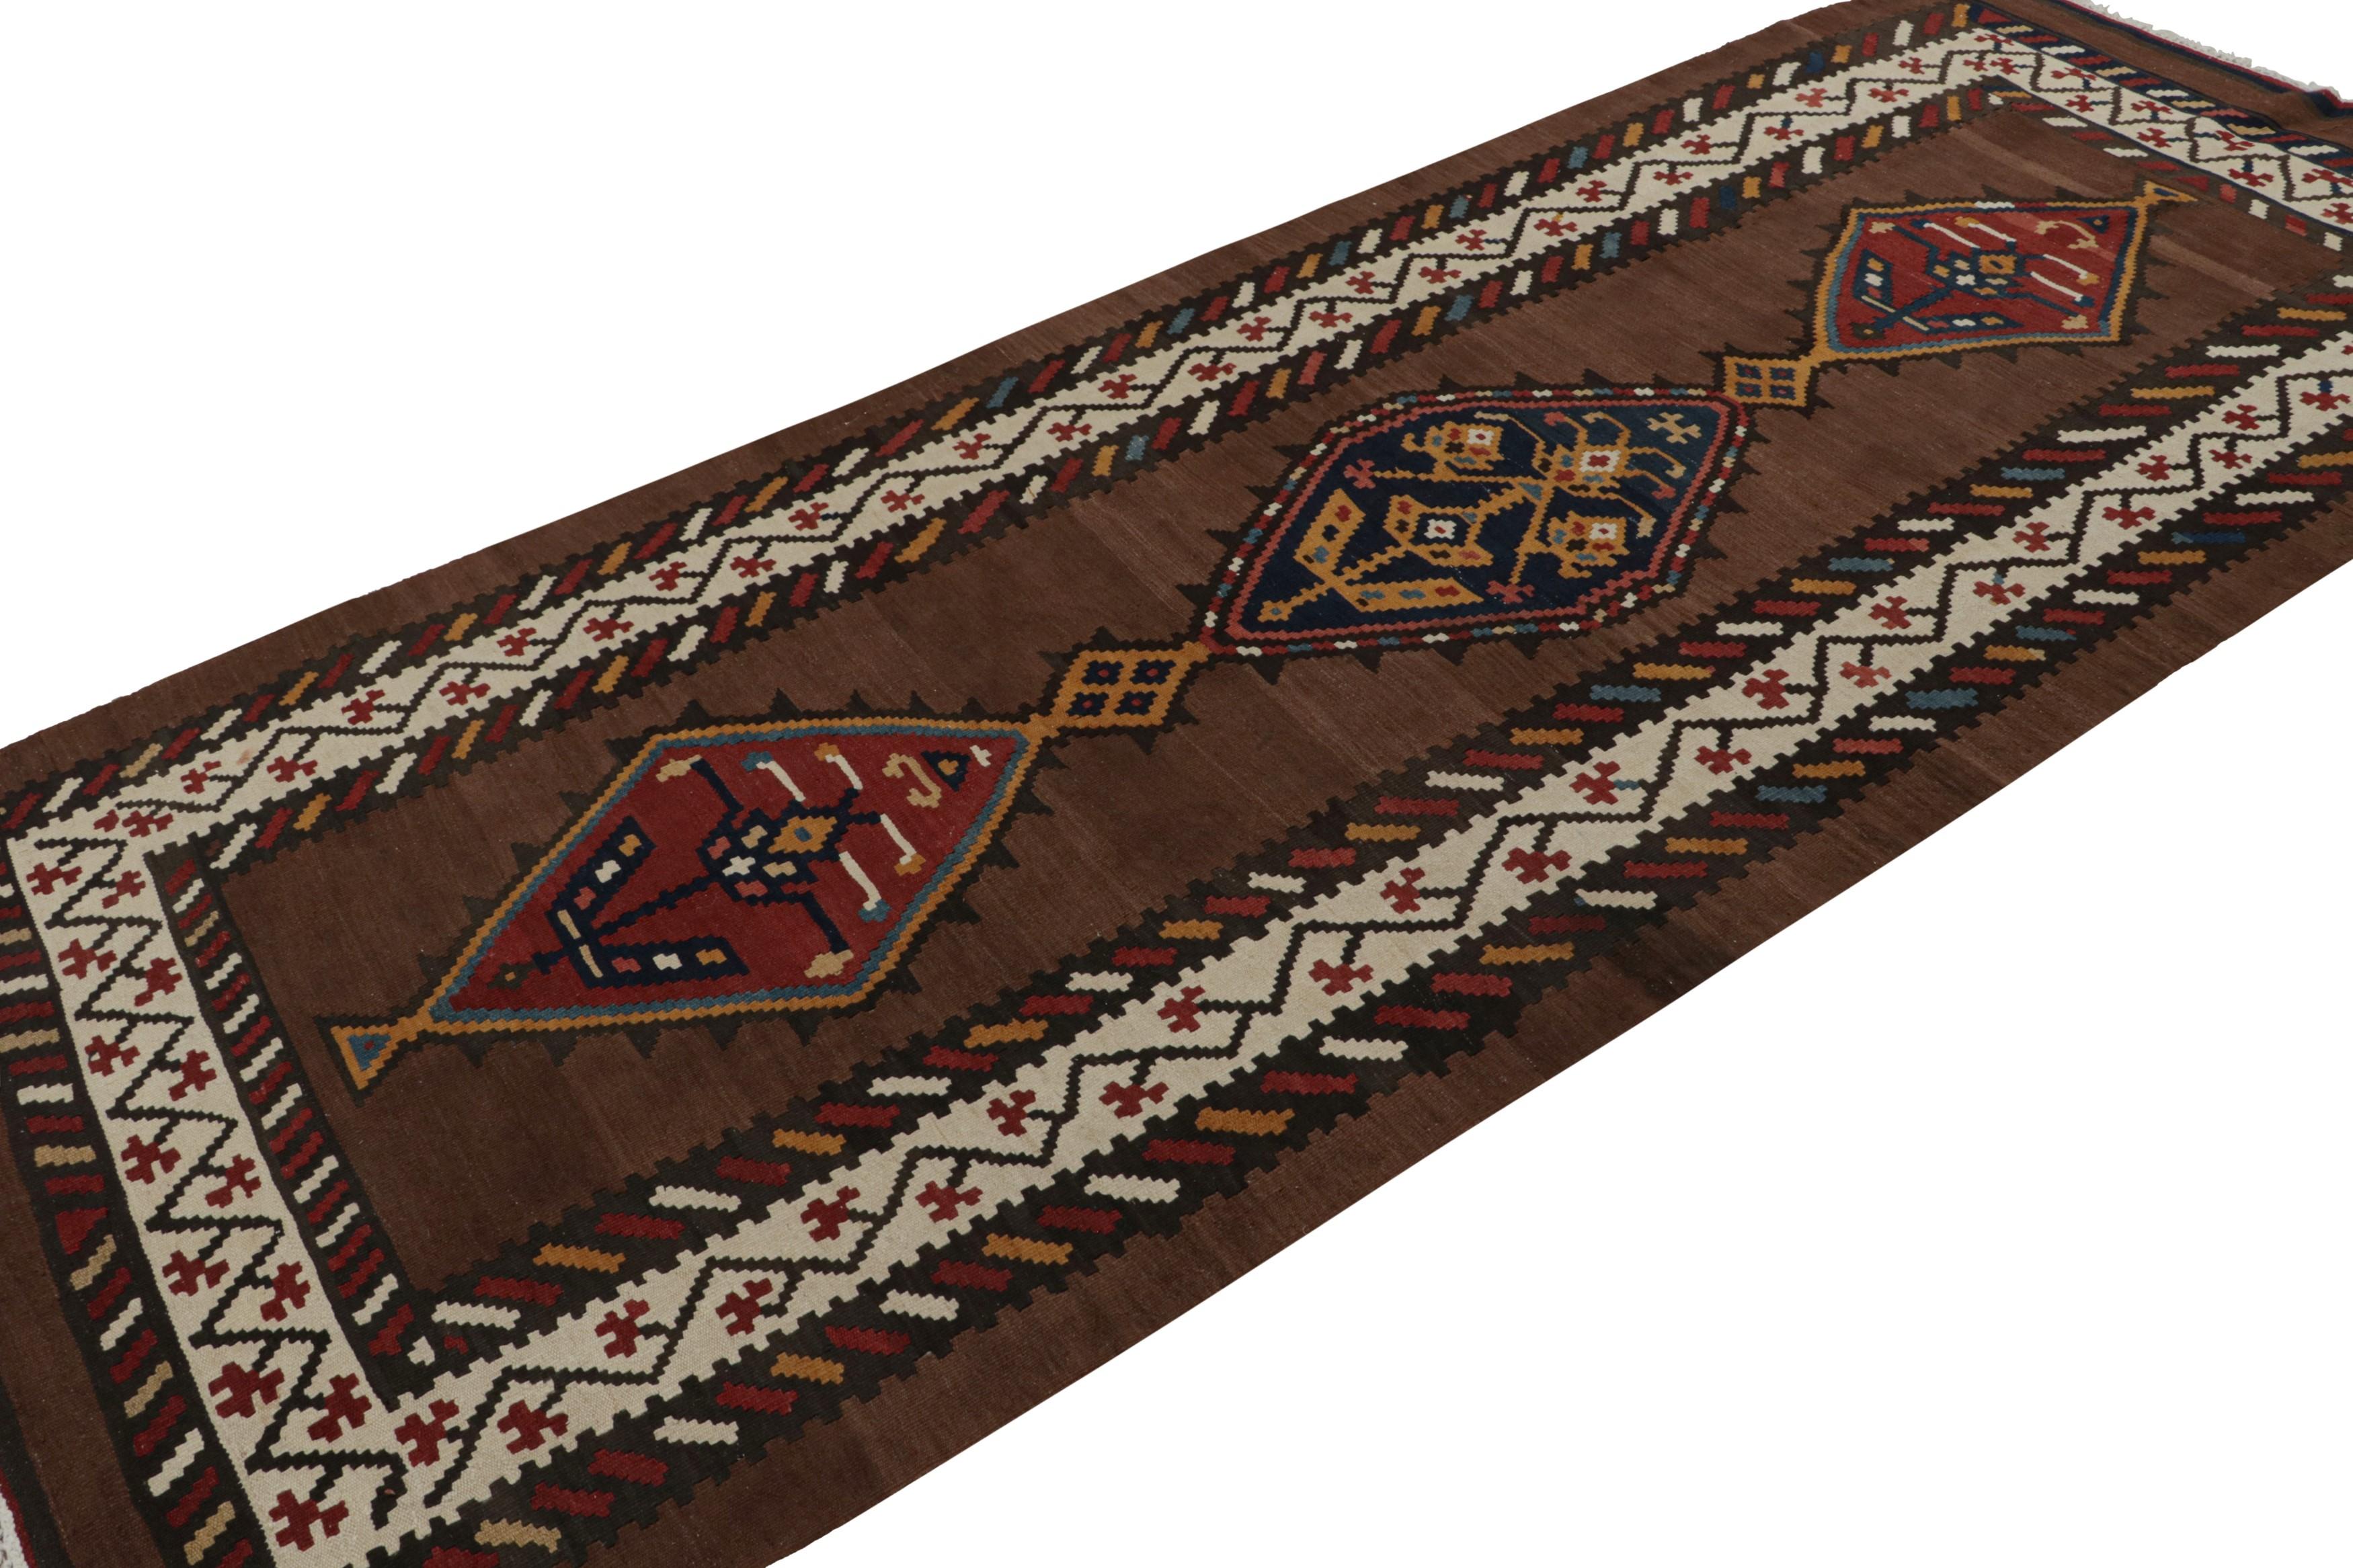 Handwoven in wool, circa 1950-1960, this 5x11 Persian tribal Kilim rug, features intricately detailed geometric patterns in beige, red and blue, in the borders and medallions, and a rich chocolate brown field.  

On the Design: 

A special piece in